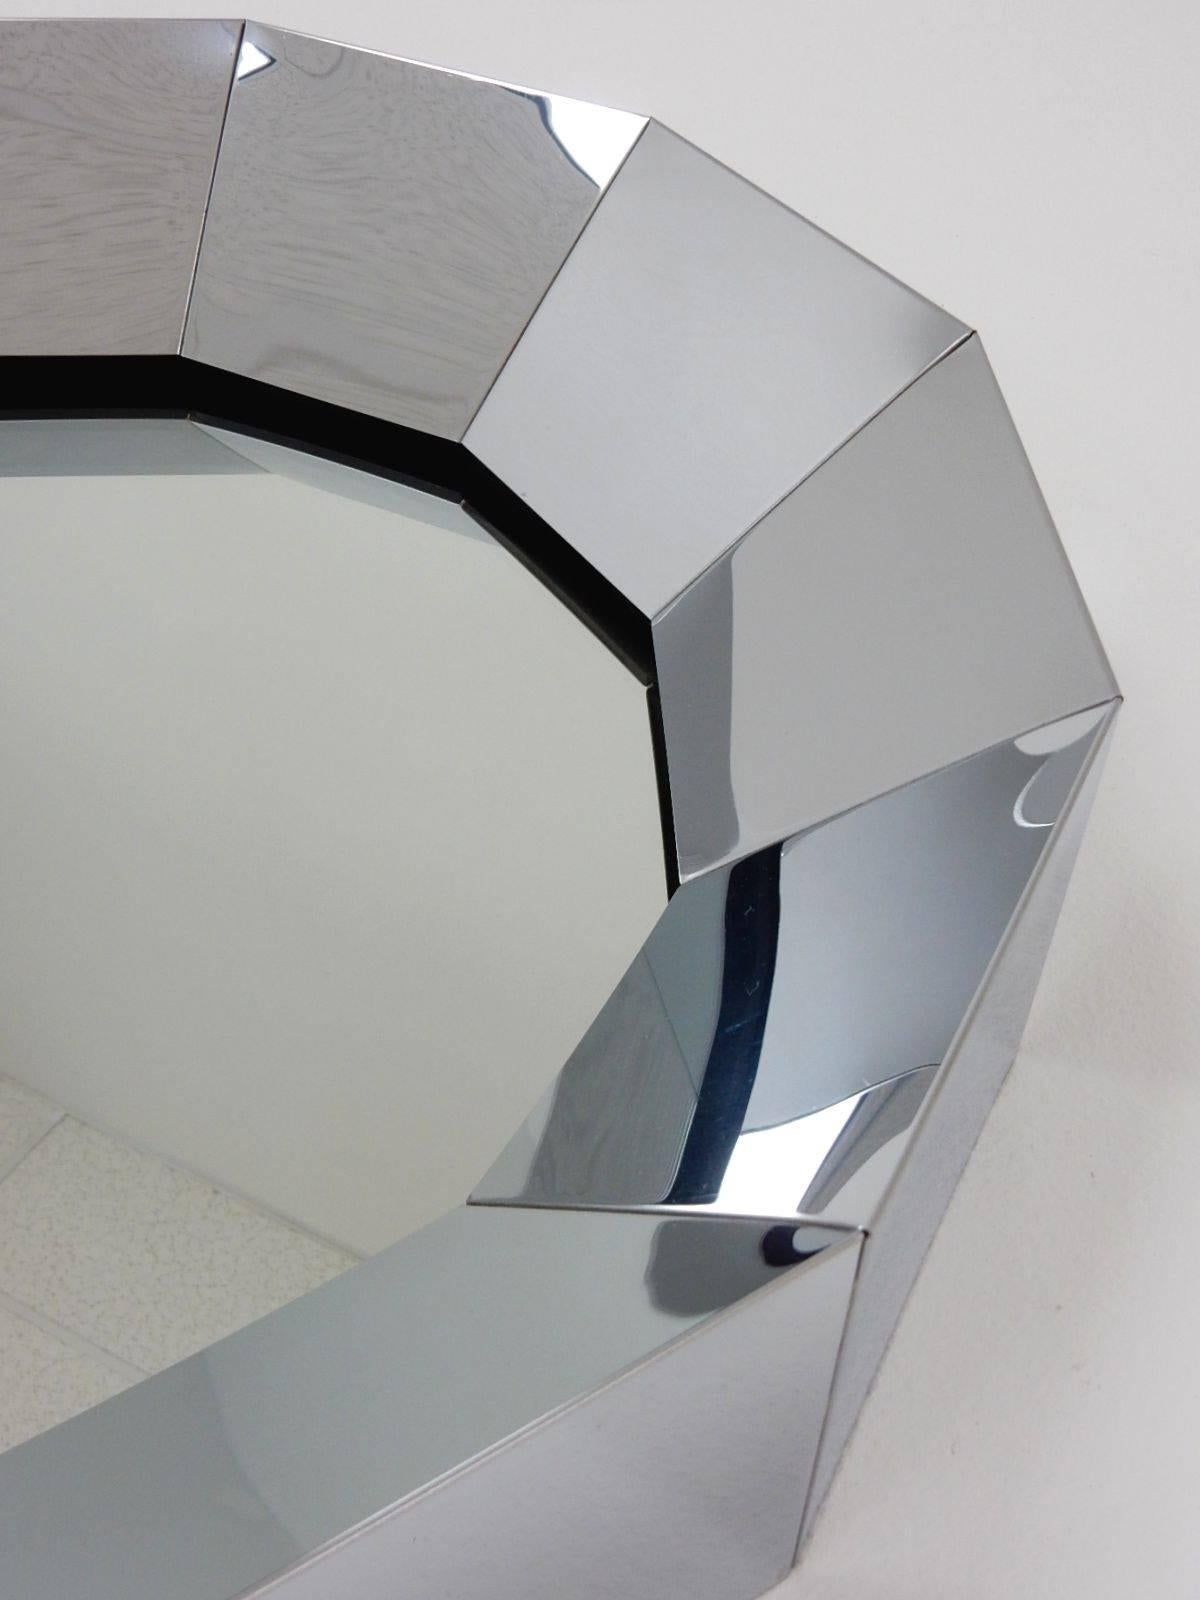 Polished stainless steel wall mirror sculpture by Curtis Jere, circa 1972, signed.
Scalloped edge with inset glass reflect a room beautifully.